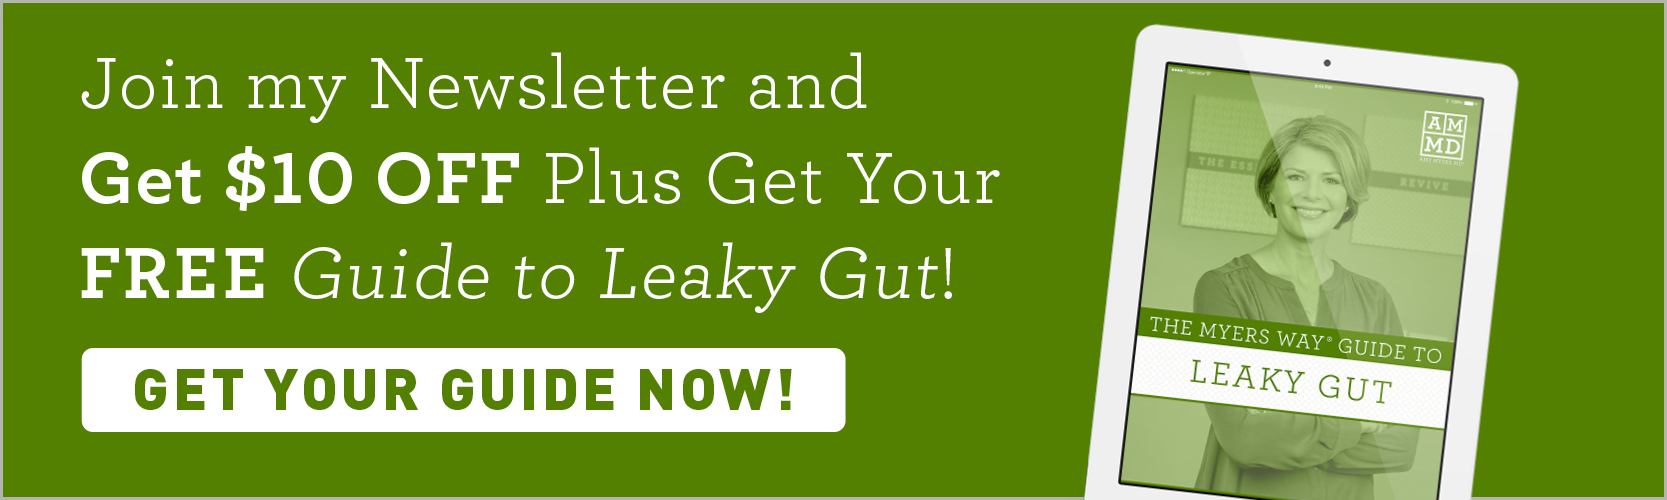 Join my Newsletter and Get $10 OFF Plus Get Your FREE Guide to Leaky Gut!